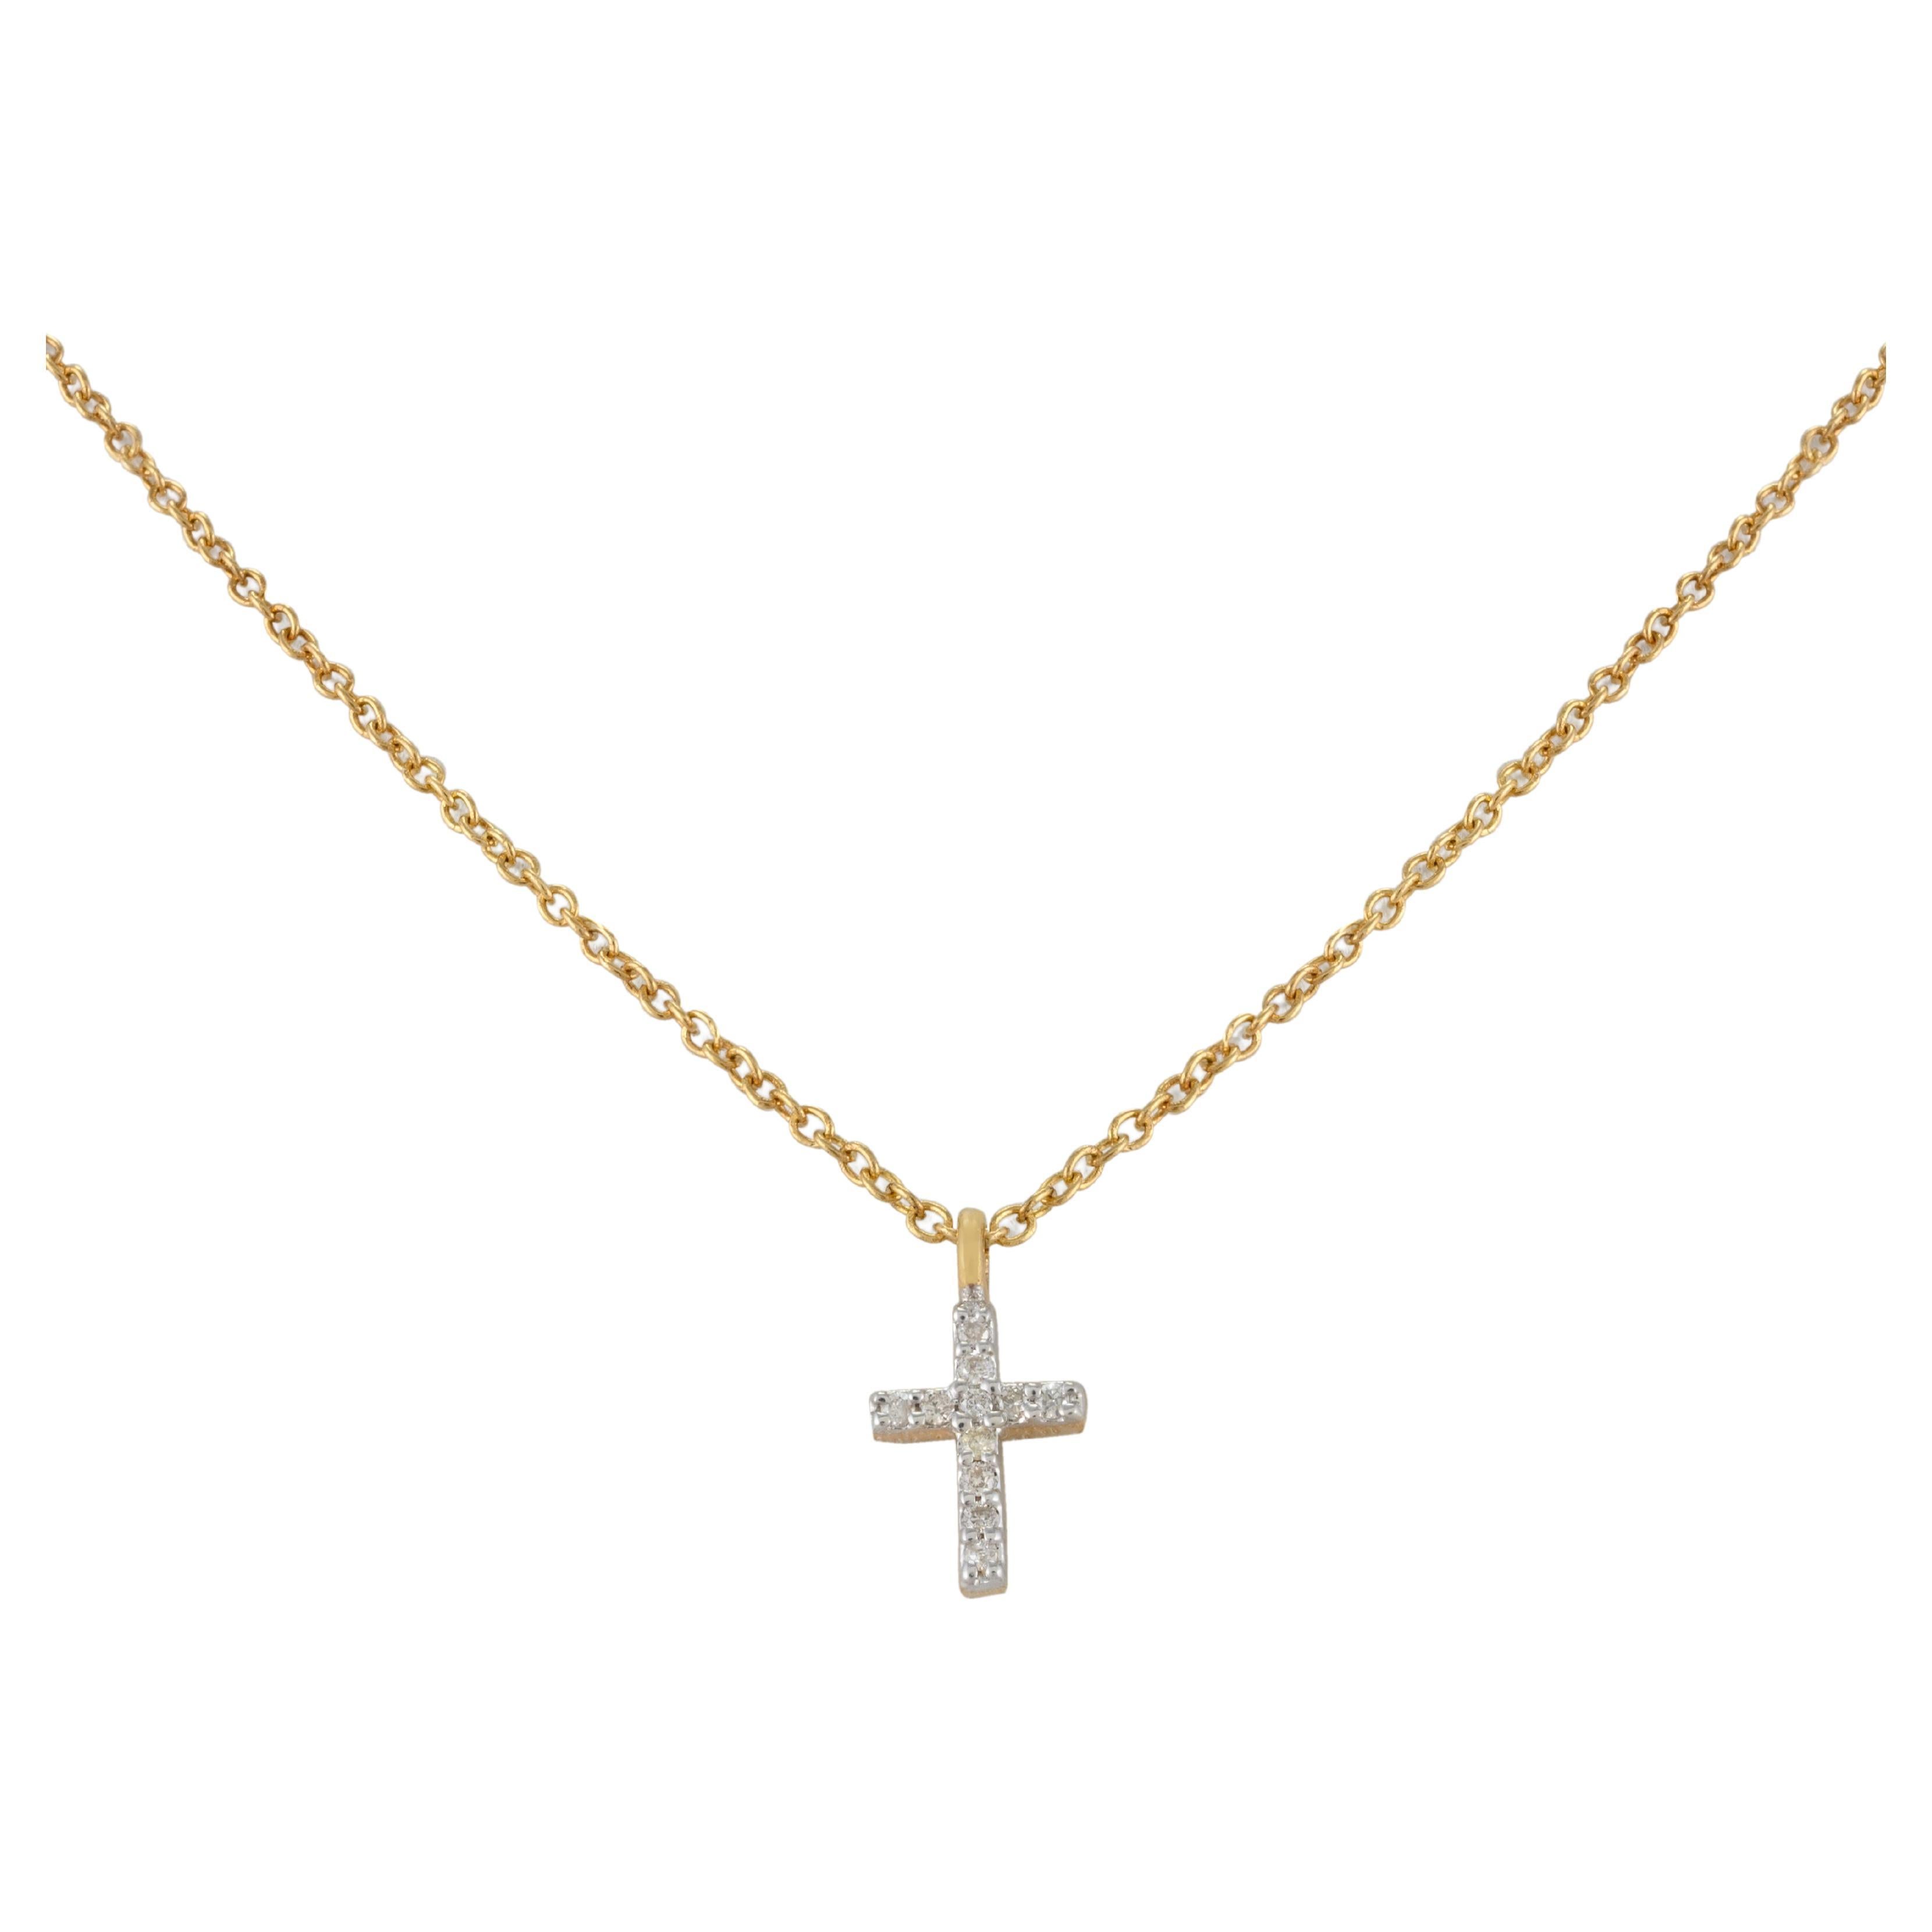 Dainty Diamond Studded Cross Pendant Necklace with Chain 18k Solid Yellow Gold